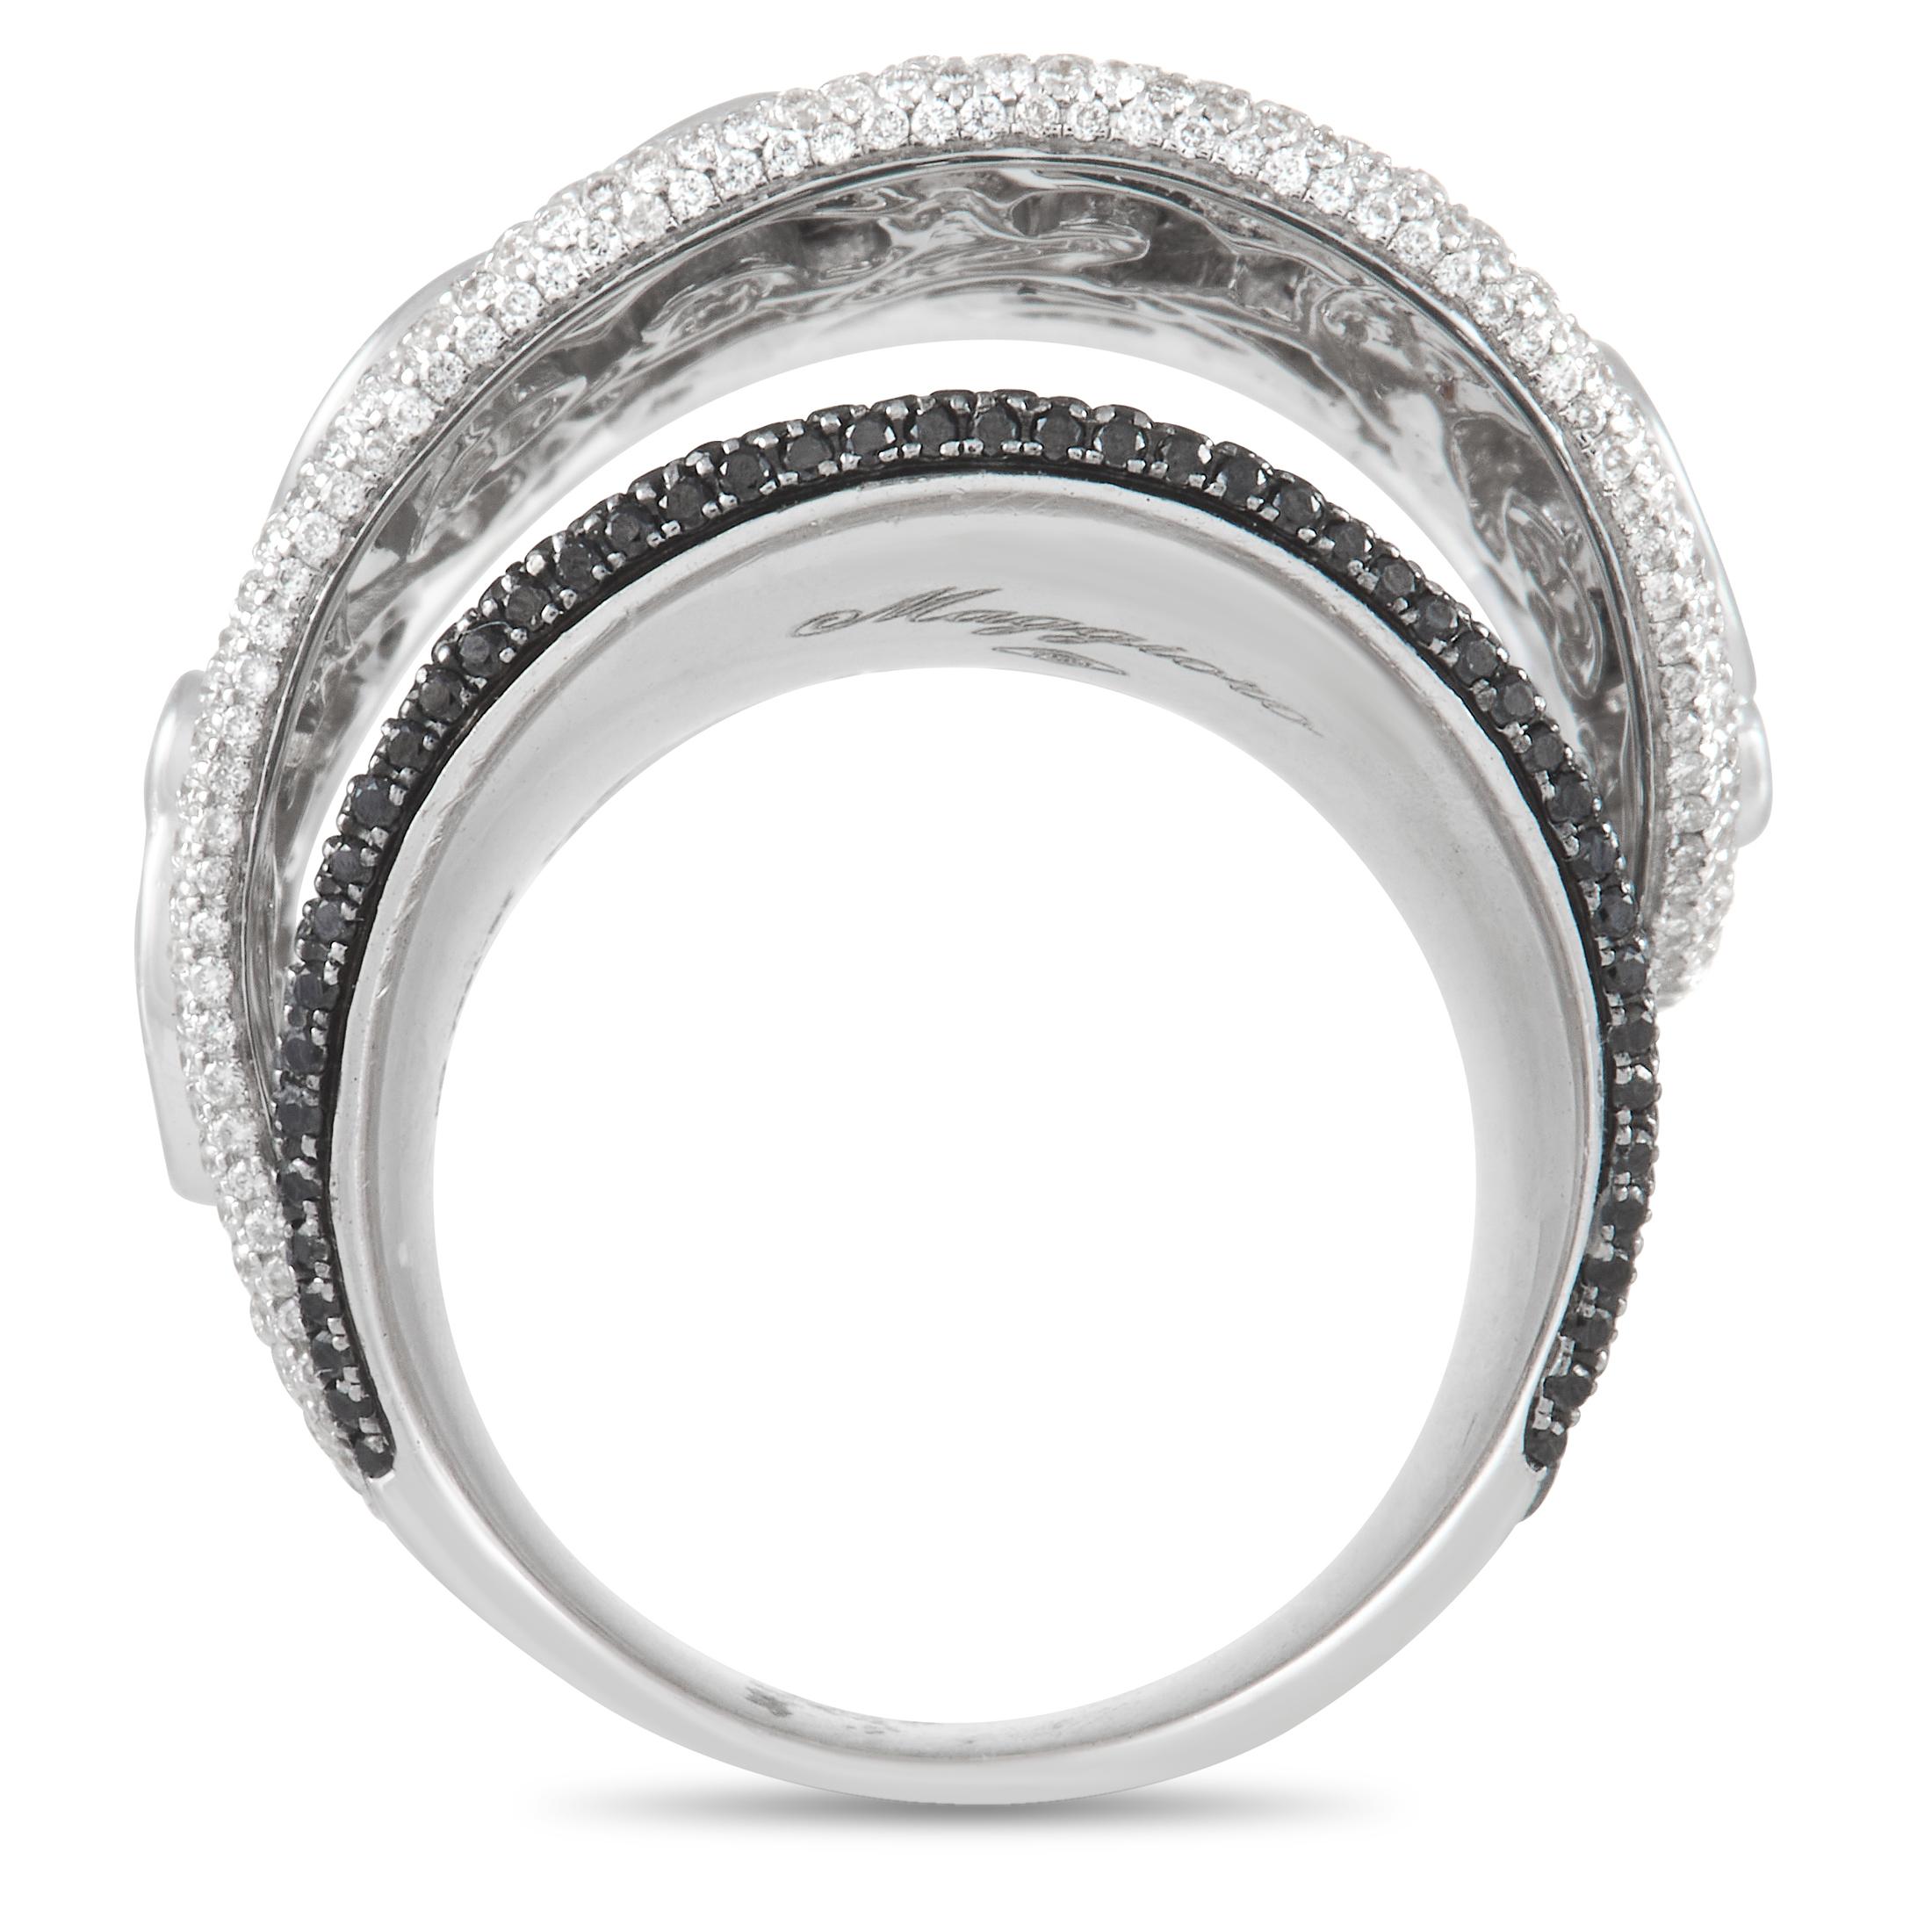 This ring from Maggioro's Rhapsody Collection is sensual and lovely. It is made of 18K white gold and boasts a design comprised of ~4.35ct of black and white diamonds.